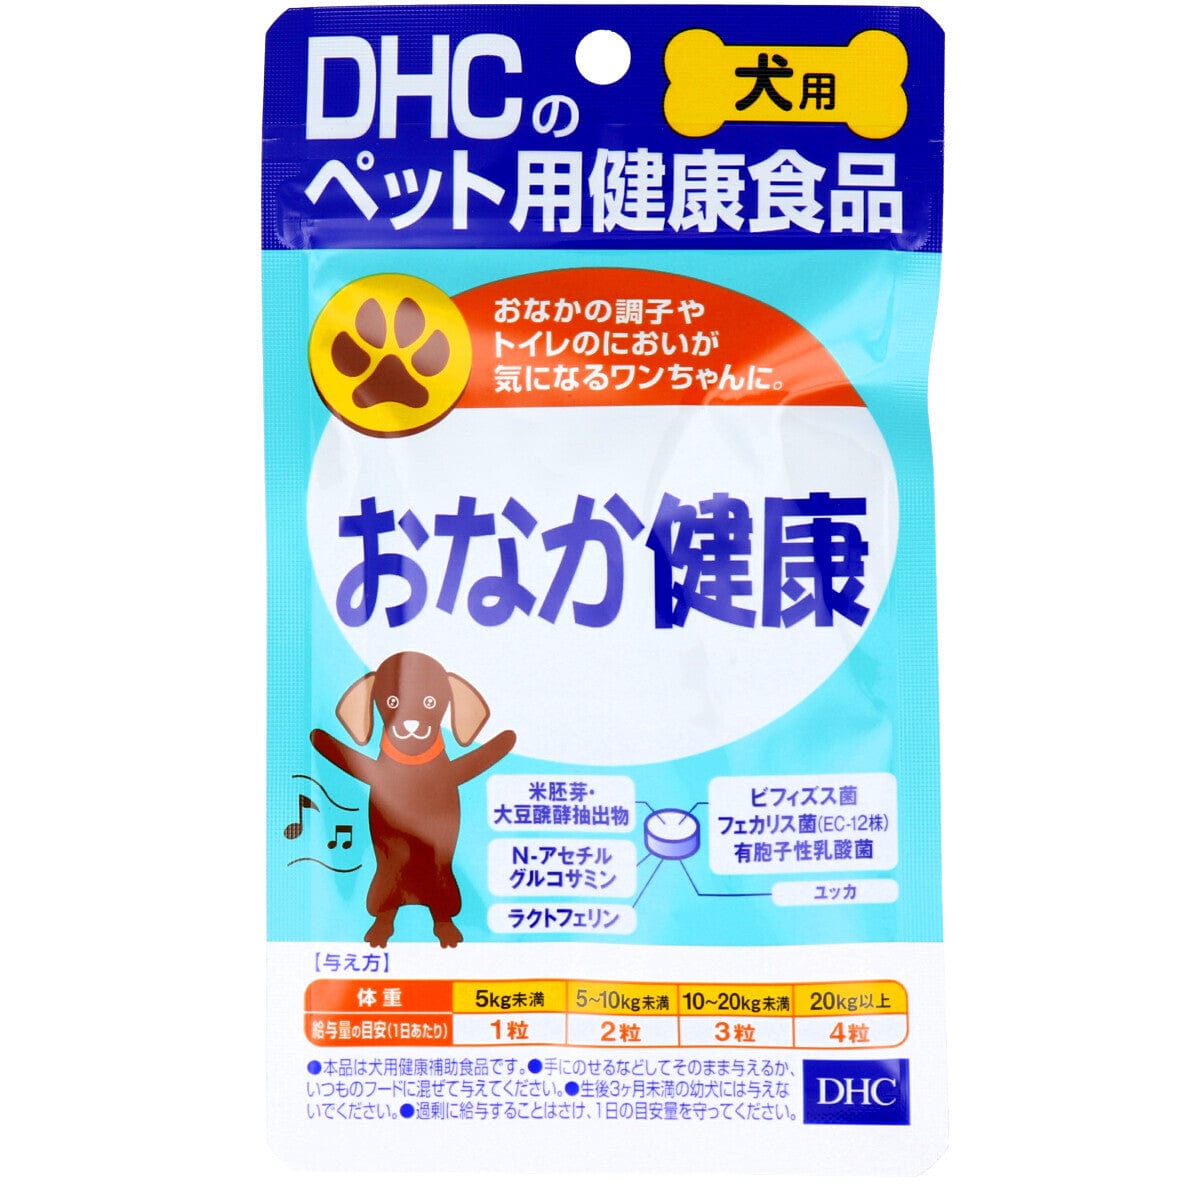 DHC - Stomach Intestinal Health Food Supplement for Pet Dogs (60 Tablets) -  Pet Dog Supplements  Durio.sg